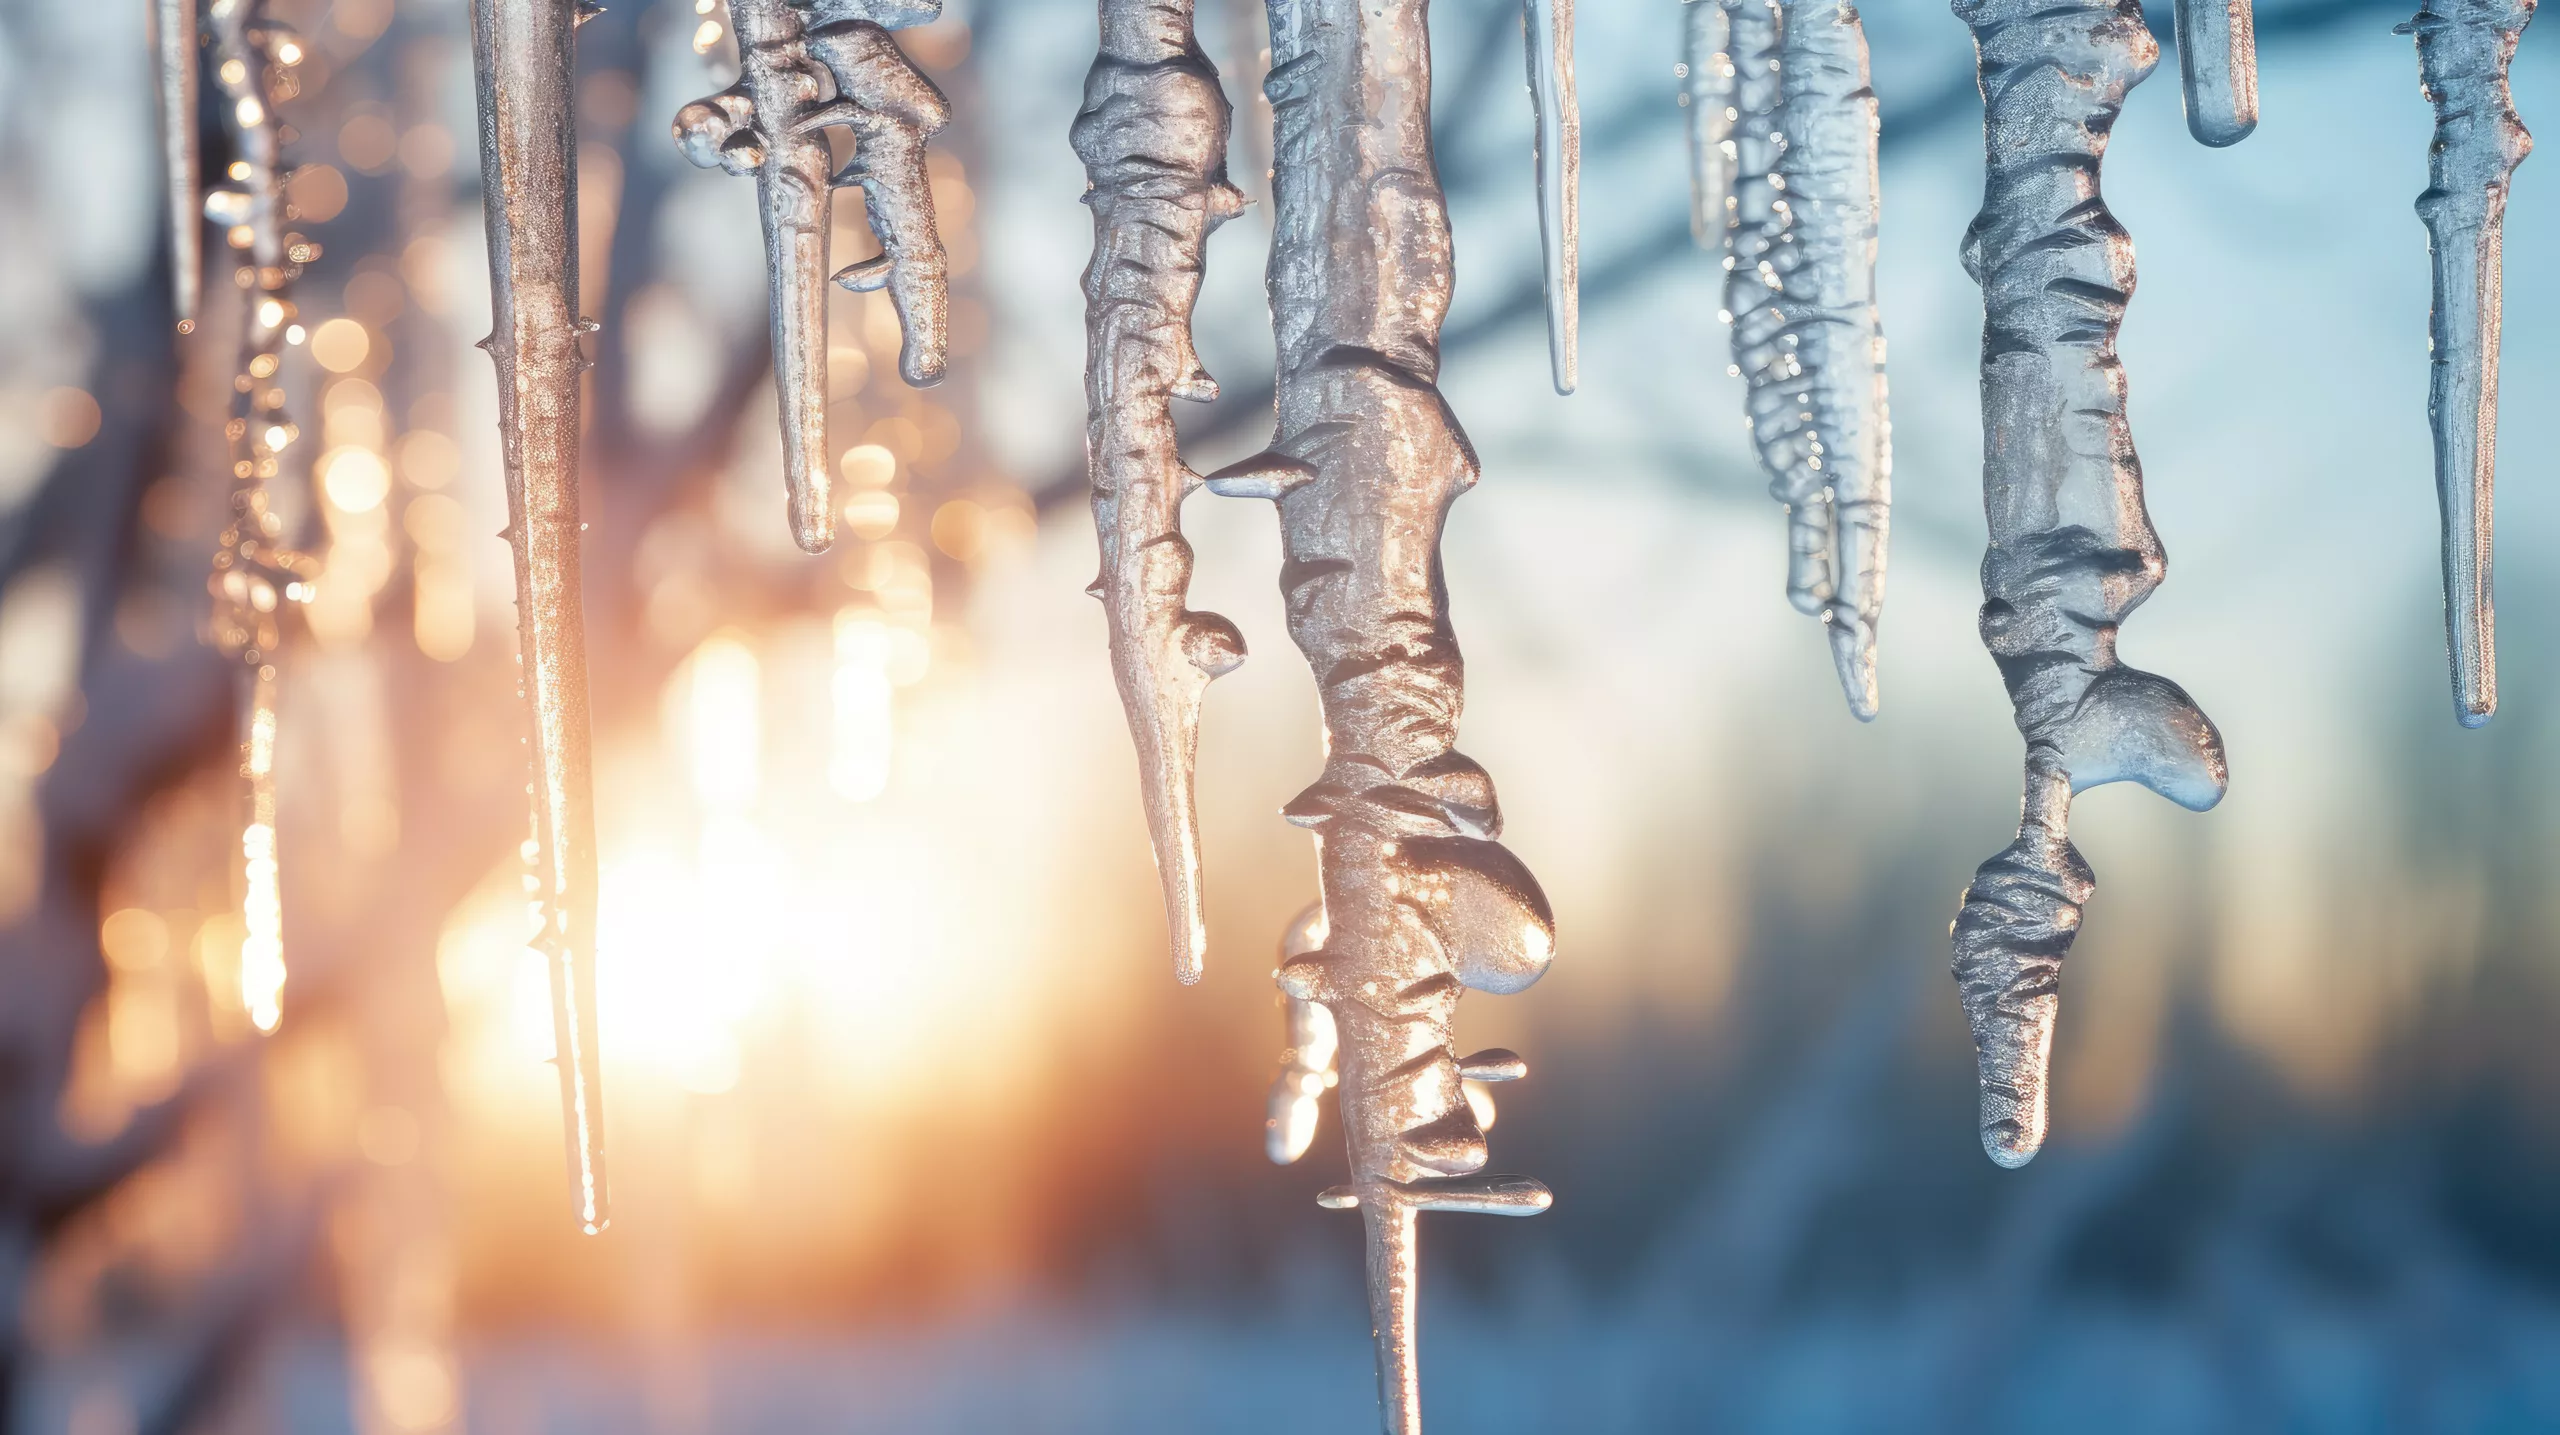 Winter Storm Resources image - Icicles with sun behind them